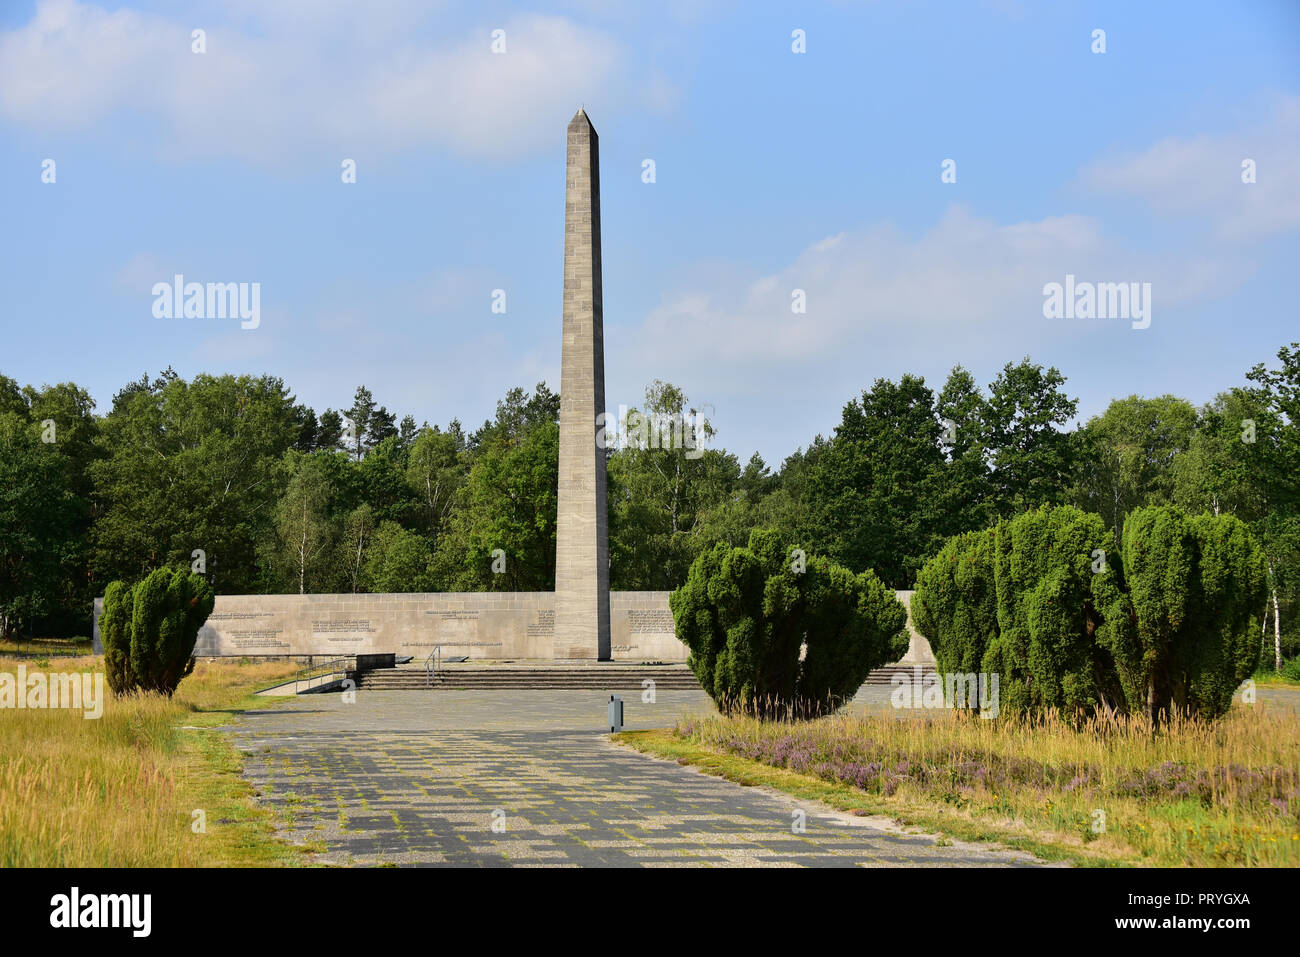 Stele, Concentration Camp Memorial Bergen-Belsen, Lower Saxony, Germany Stock Photo